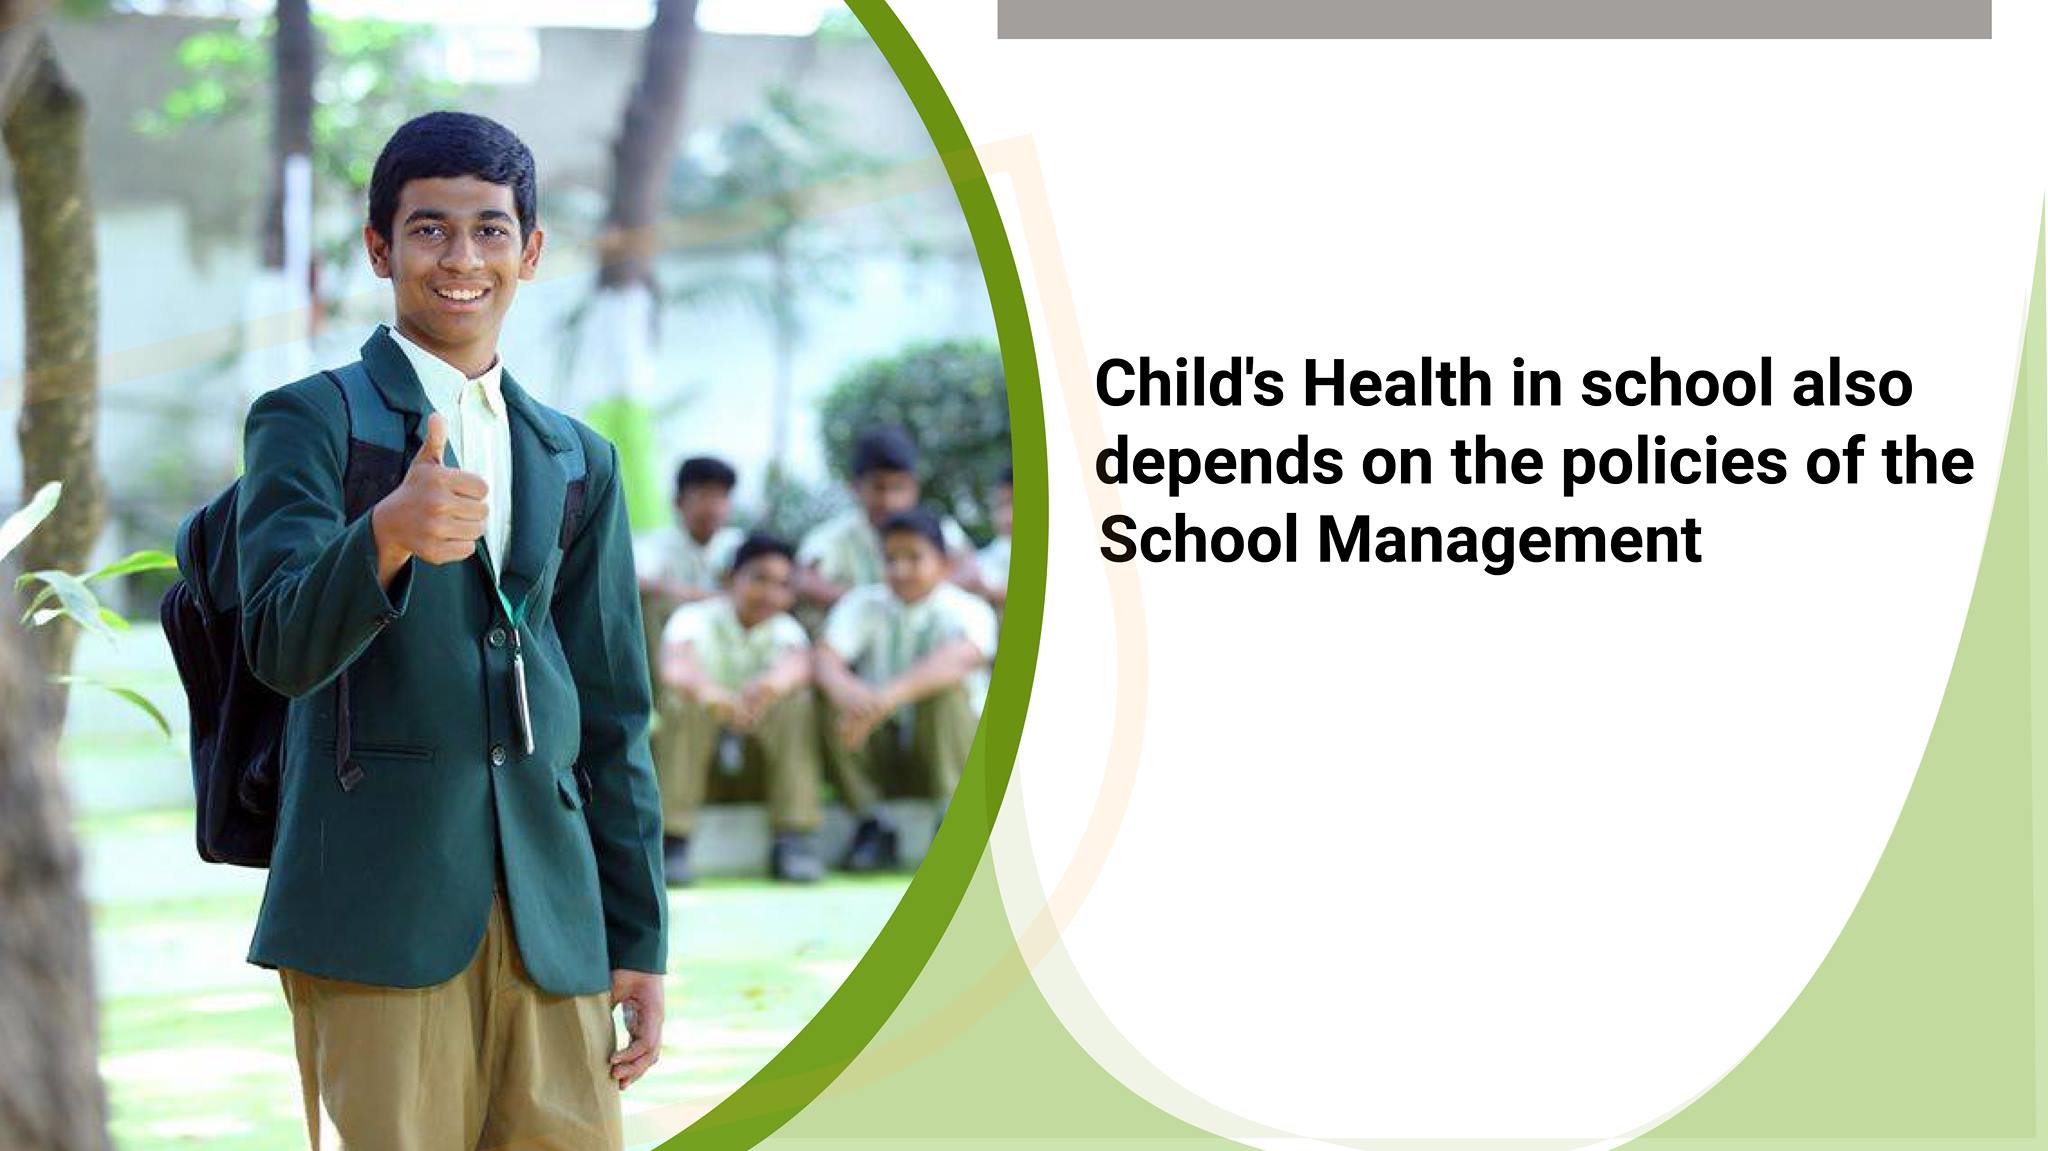  Child's Health in school also depends on the policies of the School Management 